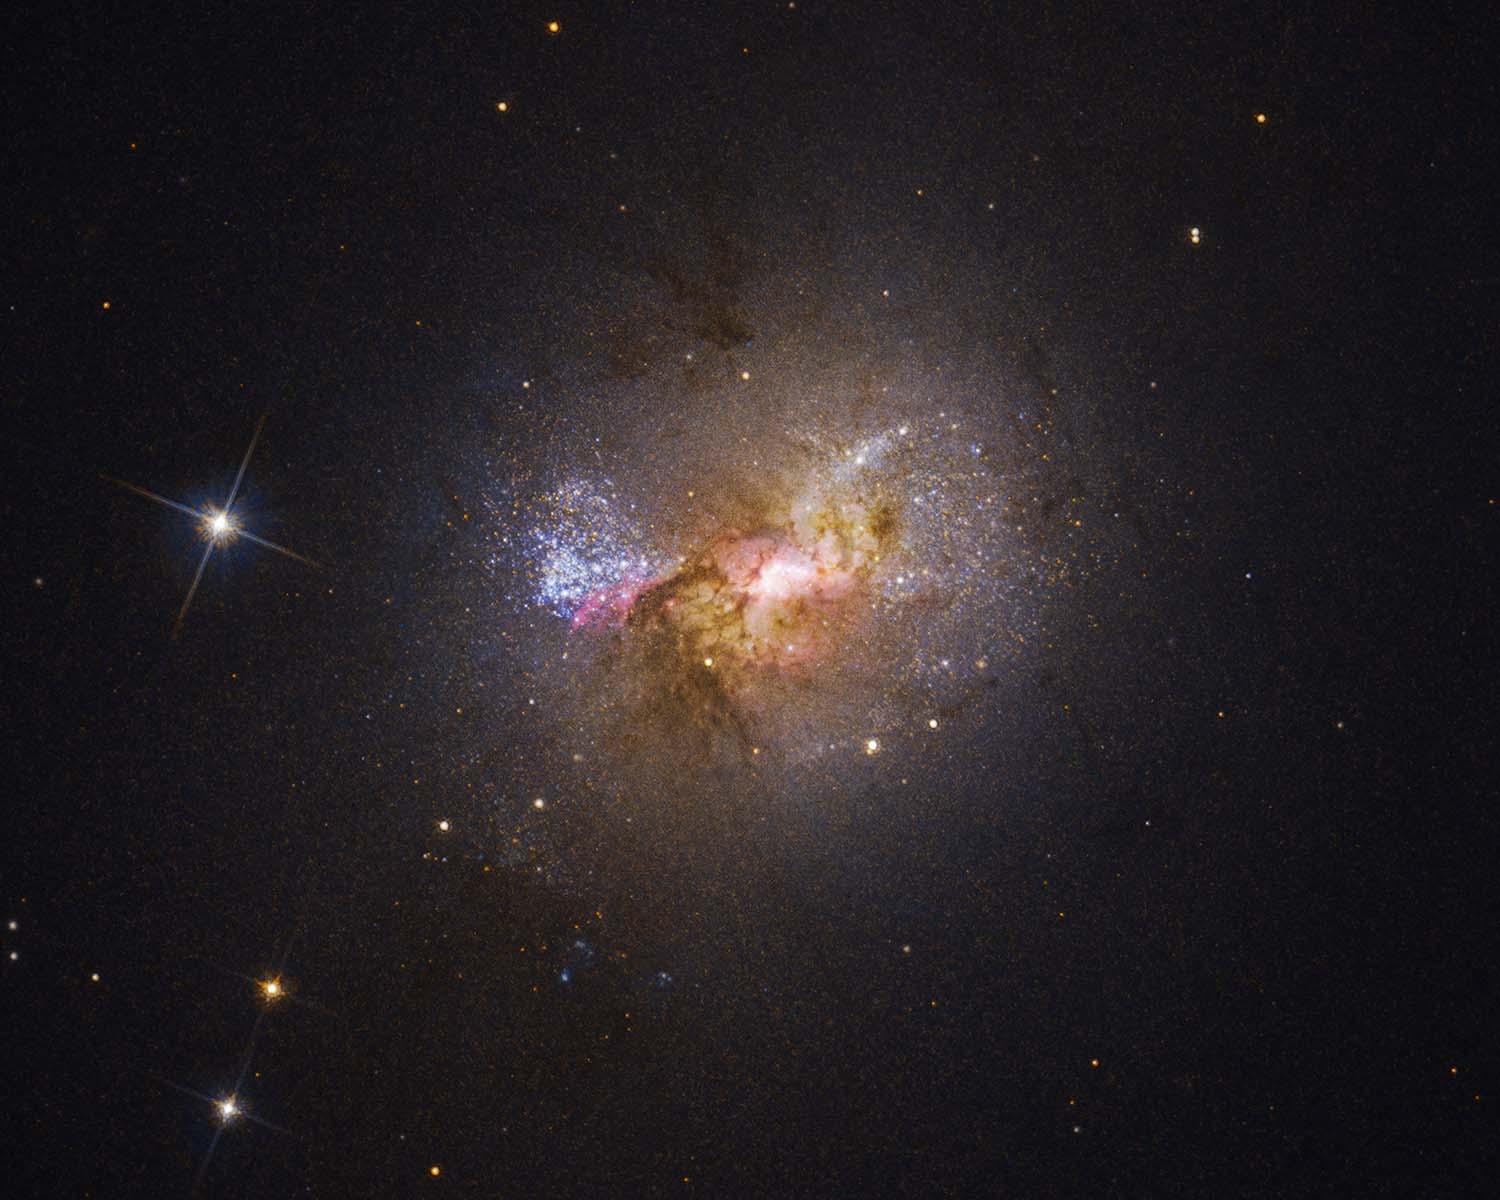 Dwarf starburst galaxy Henize 2-10 sparkles with young stars in this Hubble visible-light image. The bright region at the center, surrounded by pink clouds and dark dust lanes, indicates the location of the galaxy's massive black hole and active stellar nurseries. CREDITS:SCIENCE: NASA, ESA, Zachary Schutte (XGI), Amy Reines (XGI) IMAGE PROCESSING: Alyssa Pagan (STScI) 